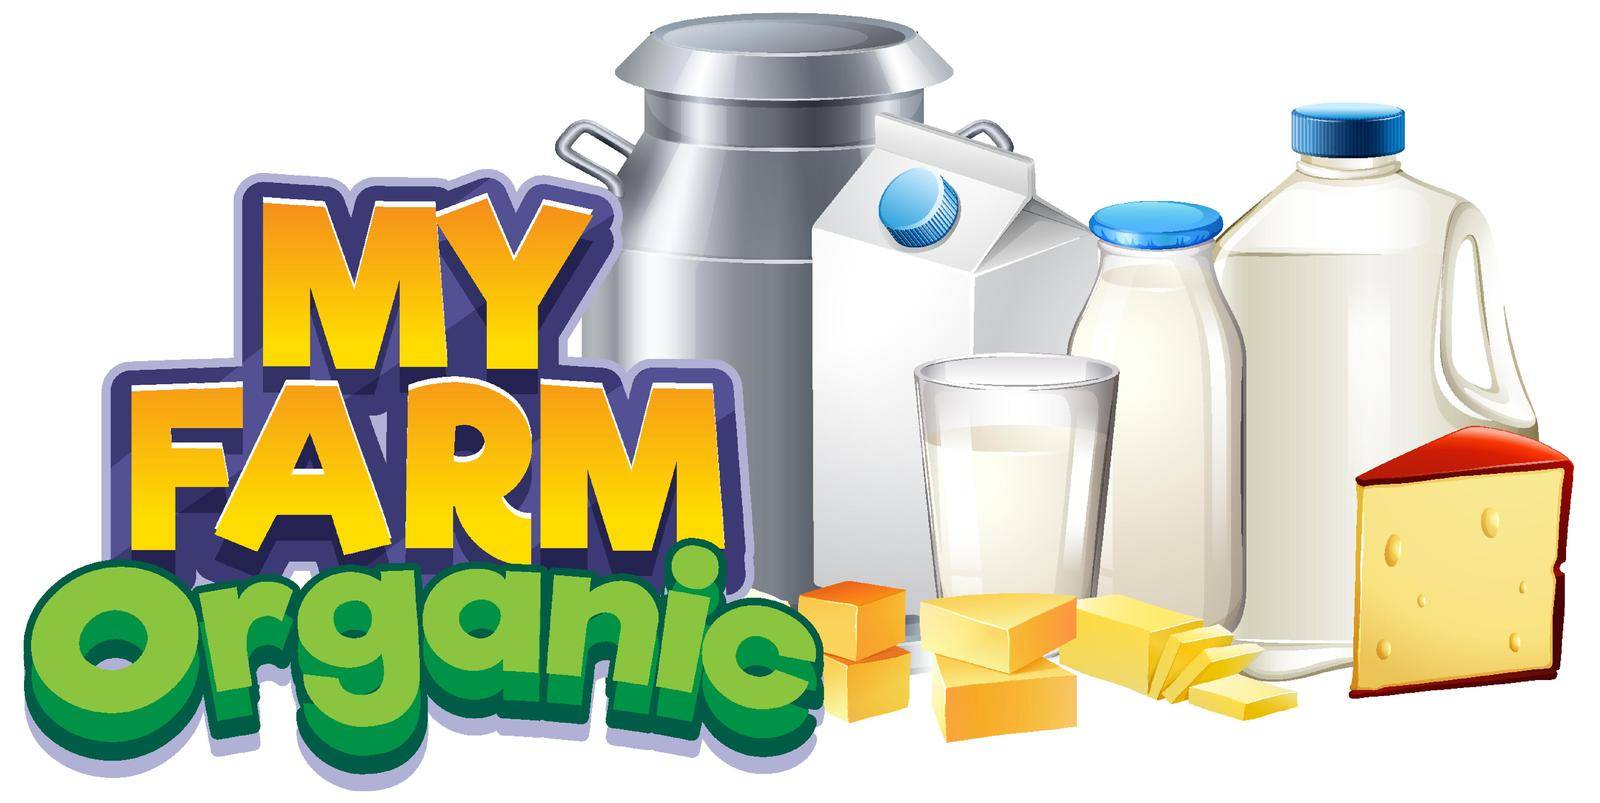 Font design for word my farm with fresh dairy products by iimages